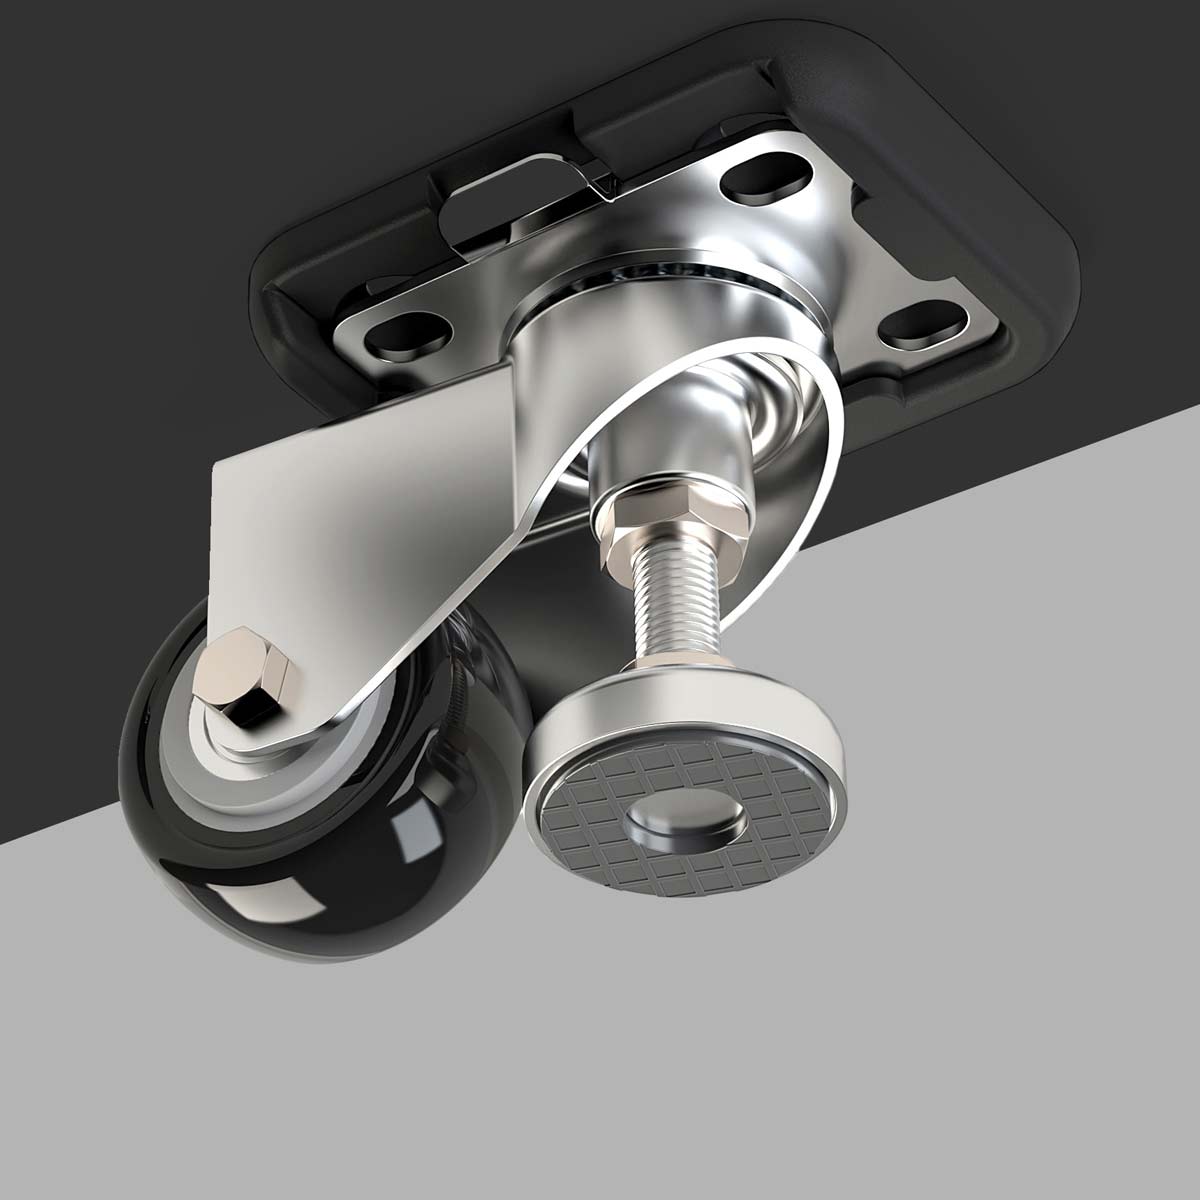 We stock a variety of castors and wheels that can match the size of your flight case